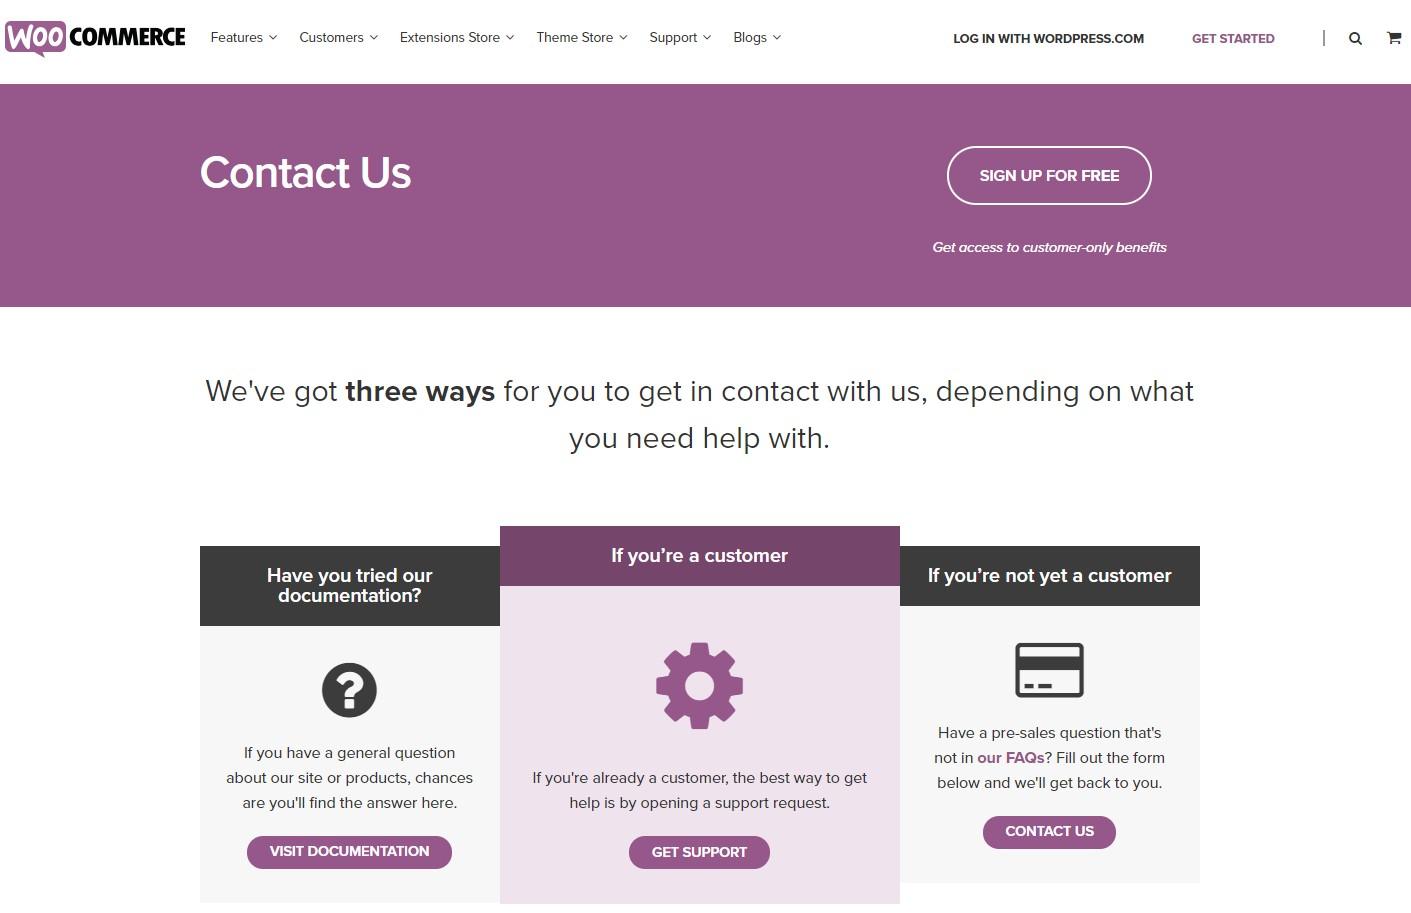 WooCommerce support services